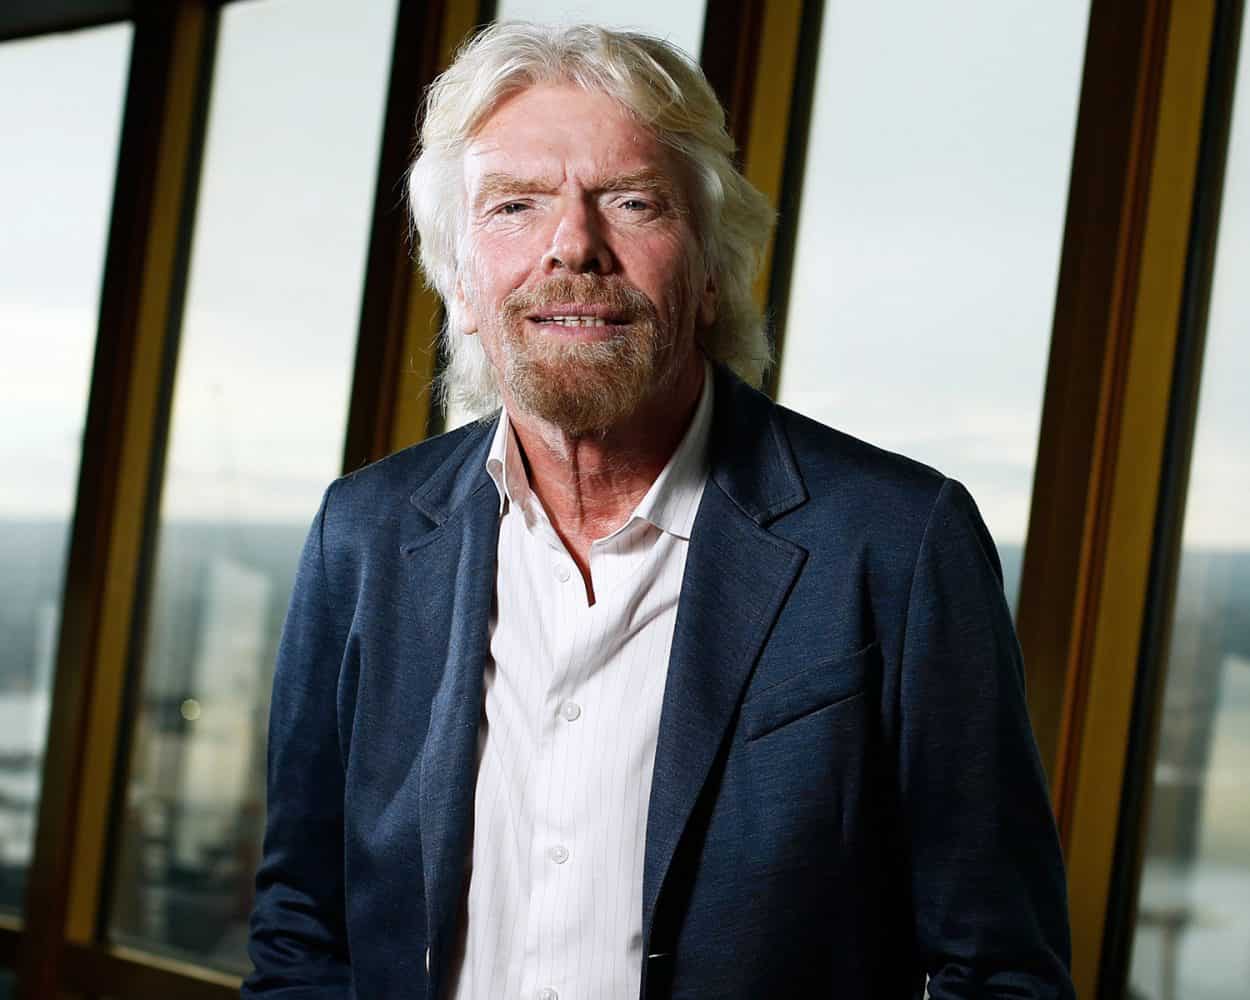 A 97% Discount on a Private Island – Richard Branson’s Art of Negotiation (And 7 Other Skills Business Leaders Need to Develop)